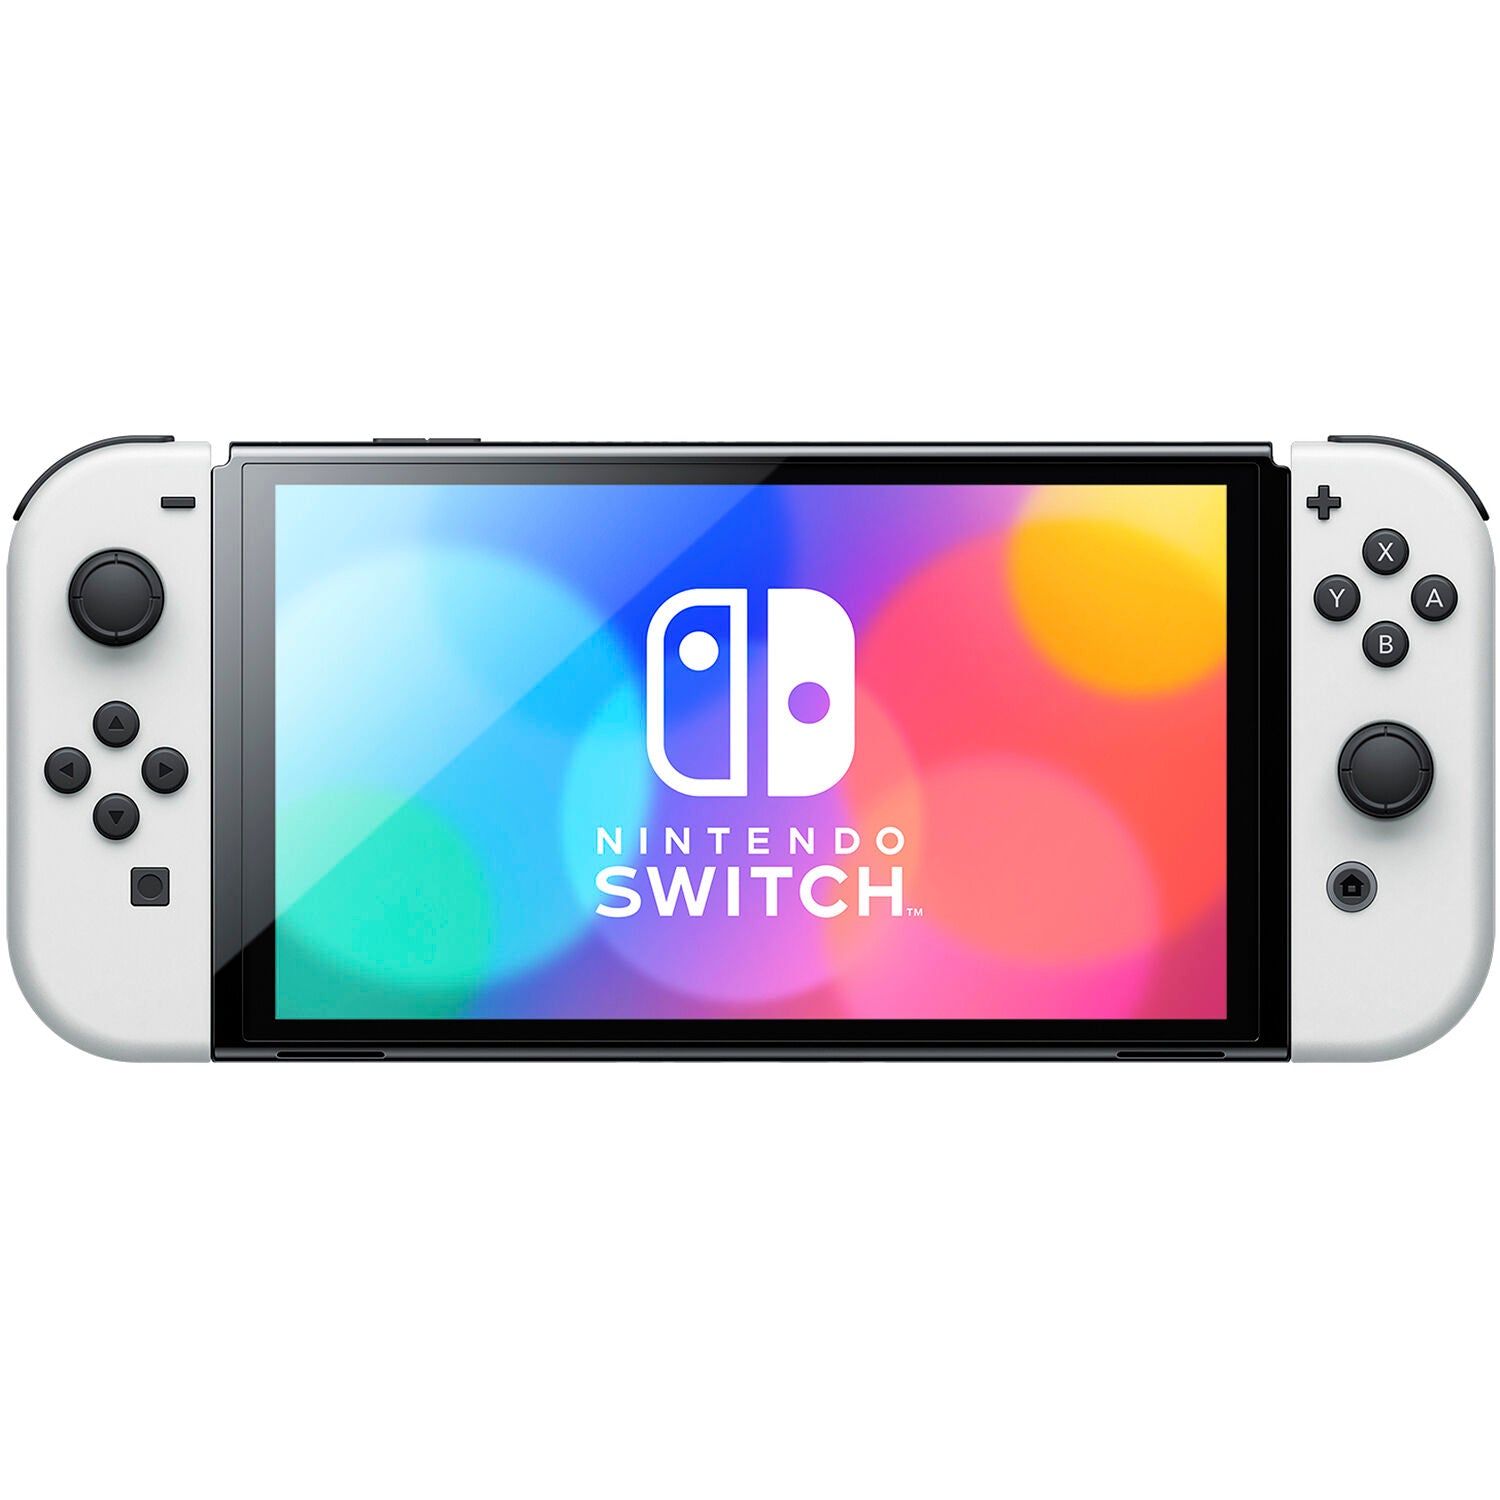 Nintendo Switch OLED Console White with Sandisk 128GB MicroSD Card, Super Mario Party and Screen Cleaning Cloth - Pro-Distributing